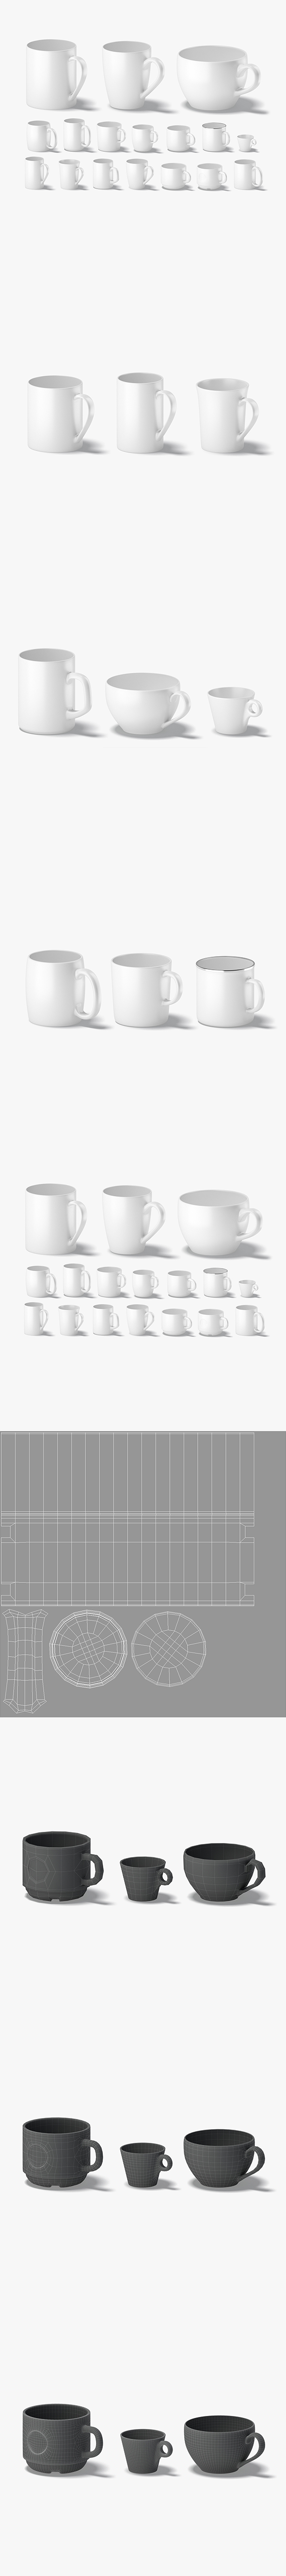 18 Ceramic Mugs Shapes - white cups different forms and sizes